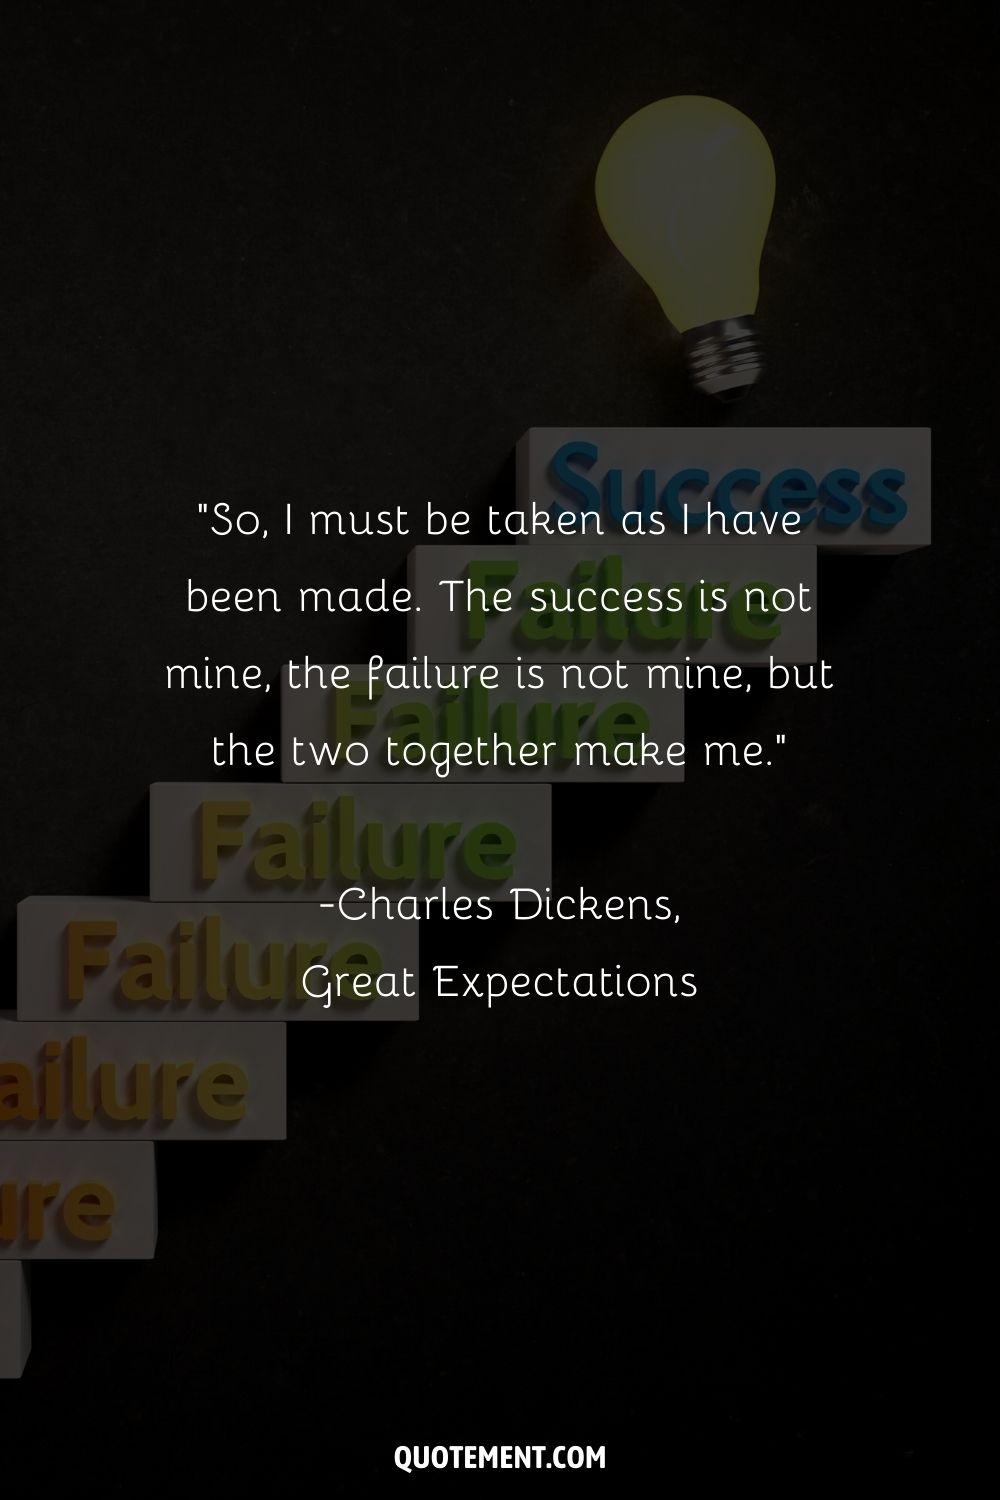 “So, I must be taken as I have been made. The success is not mine, the failure is not mine, but the two together make me.” ― Charles Dickens, Great Expectations